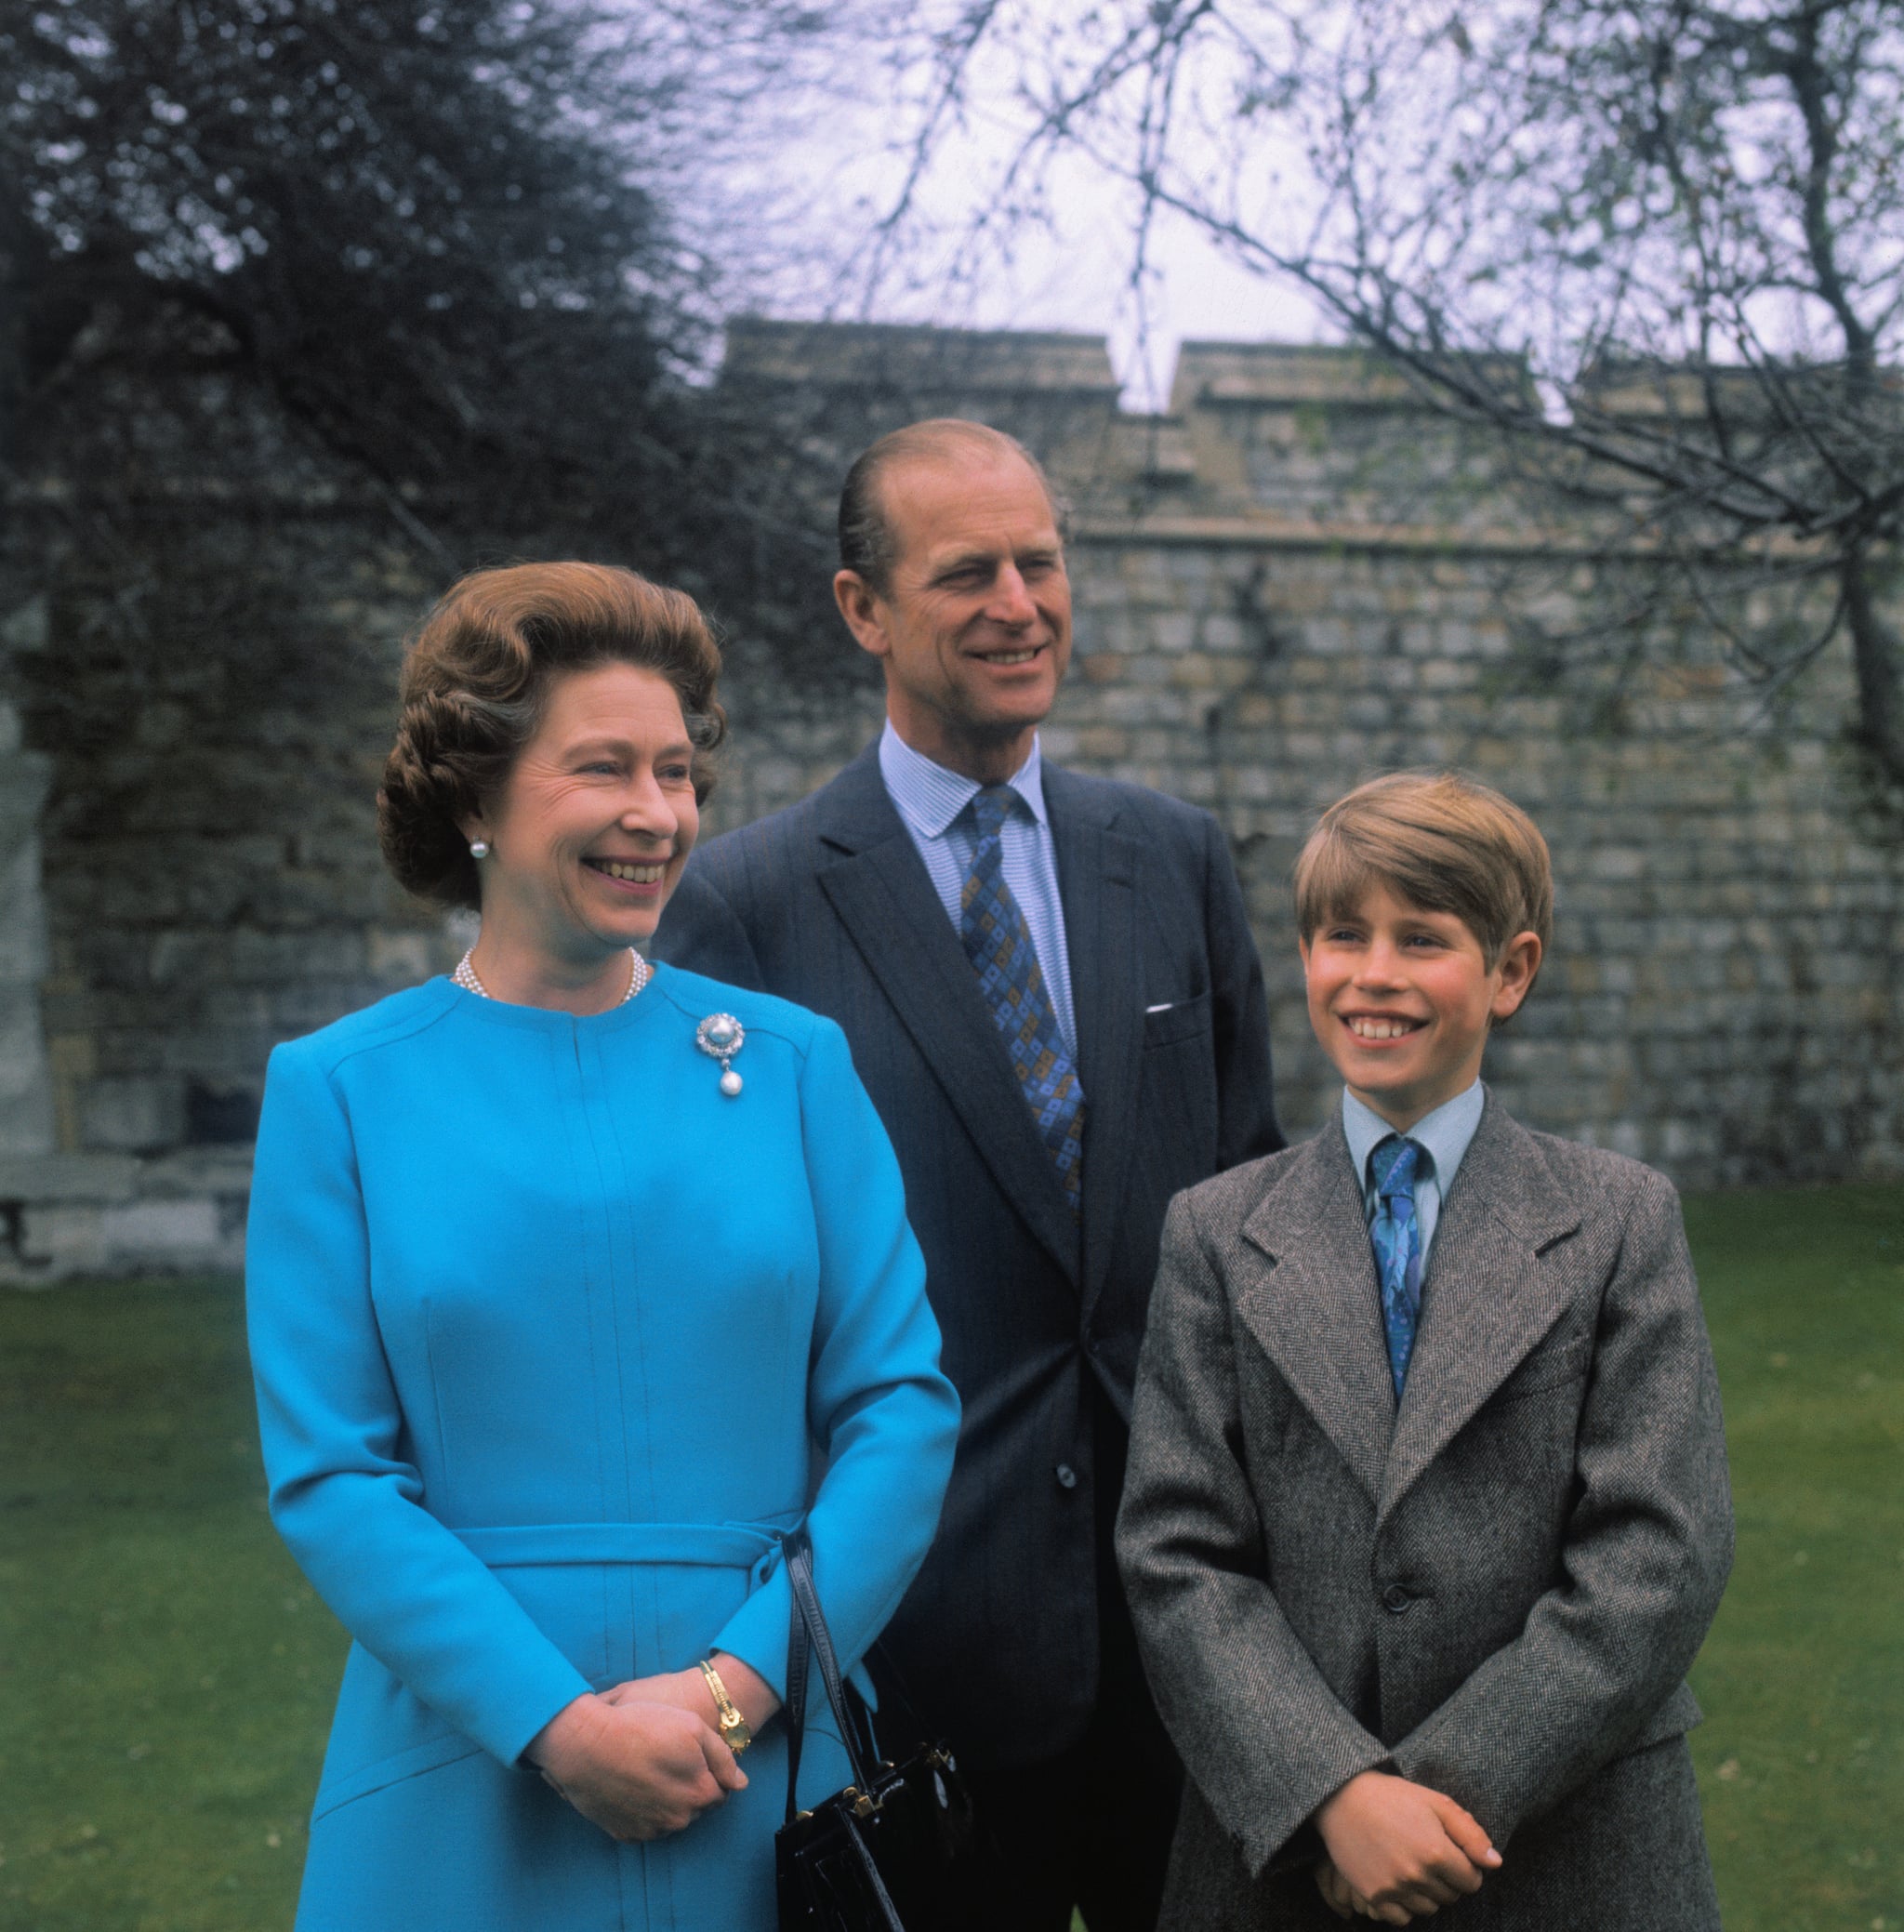 Queen Elizabeth II, Prince Philip, and Prince Edward in 1976